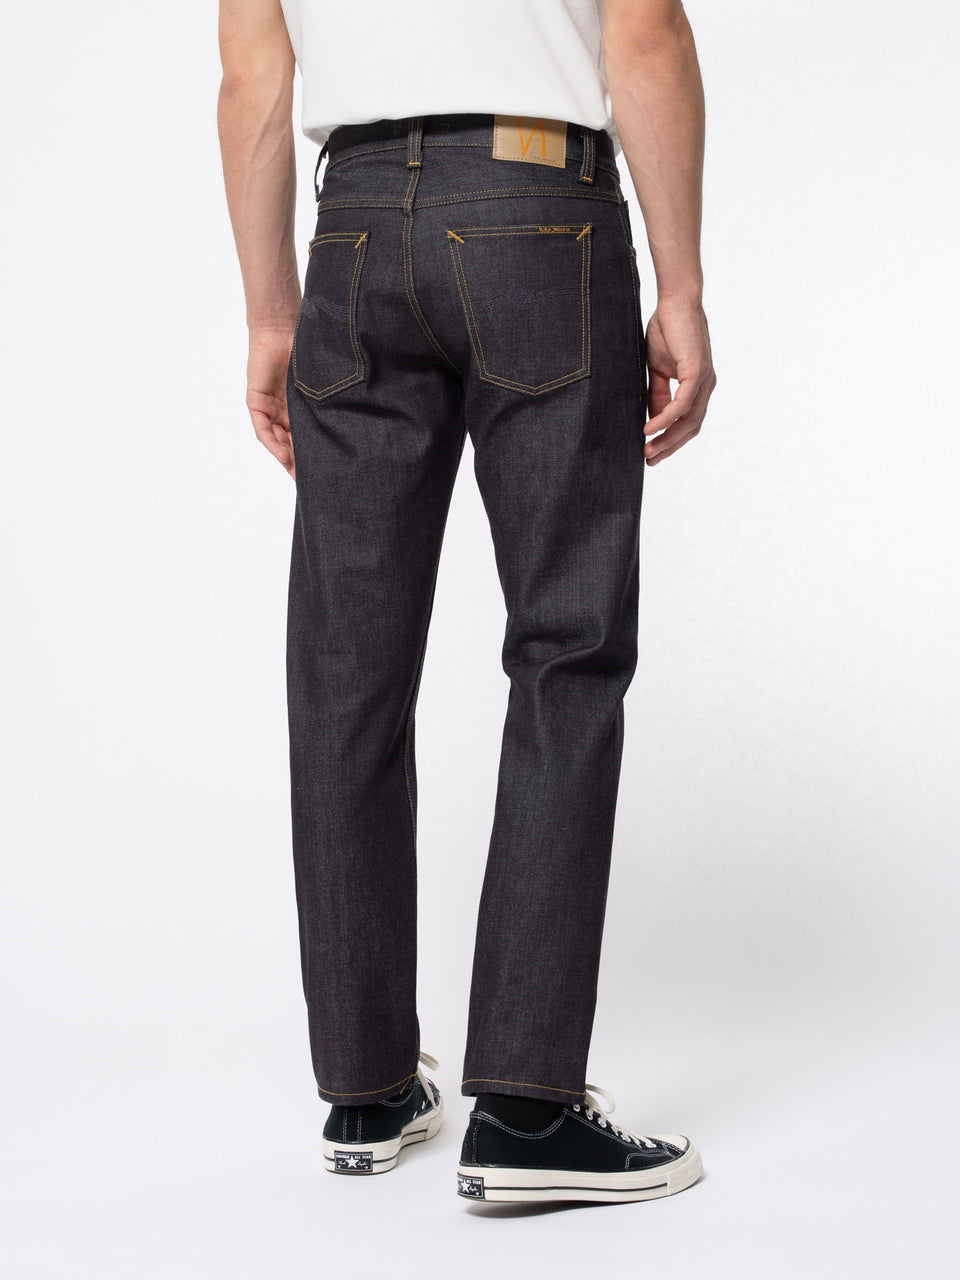 Nudie Gritty Jackson Dry Classic Navy